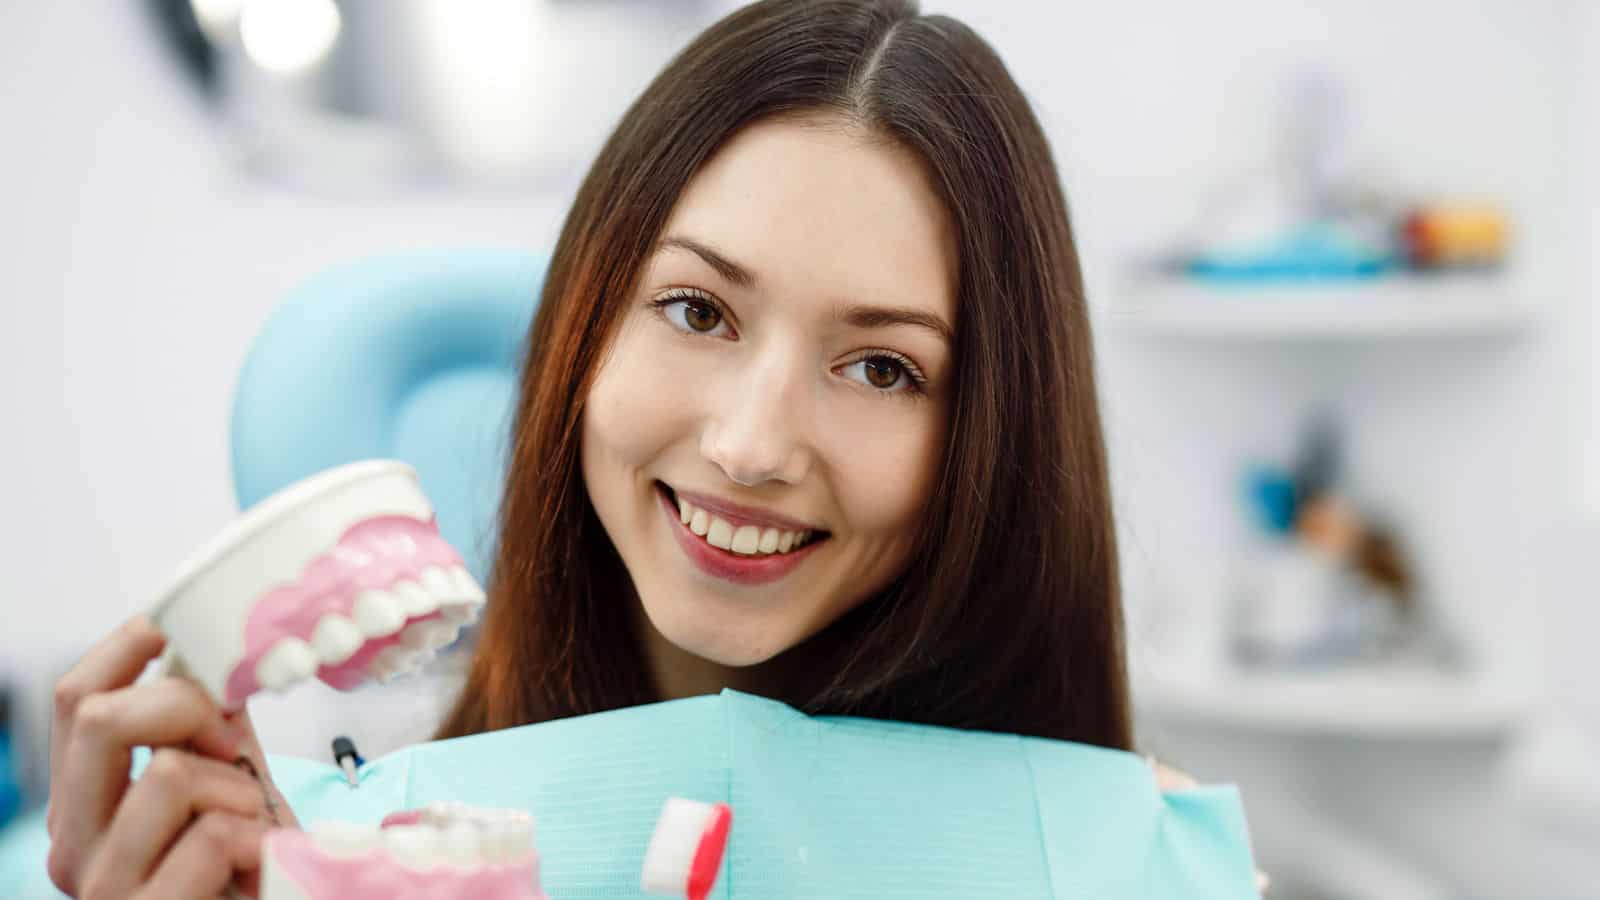 Affordable Dentistry & Orthodontics of Dallas